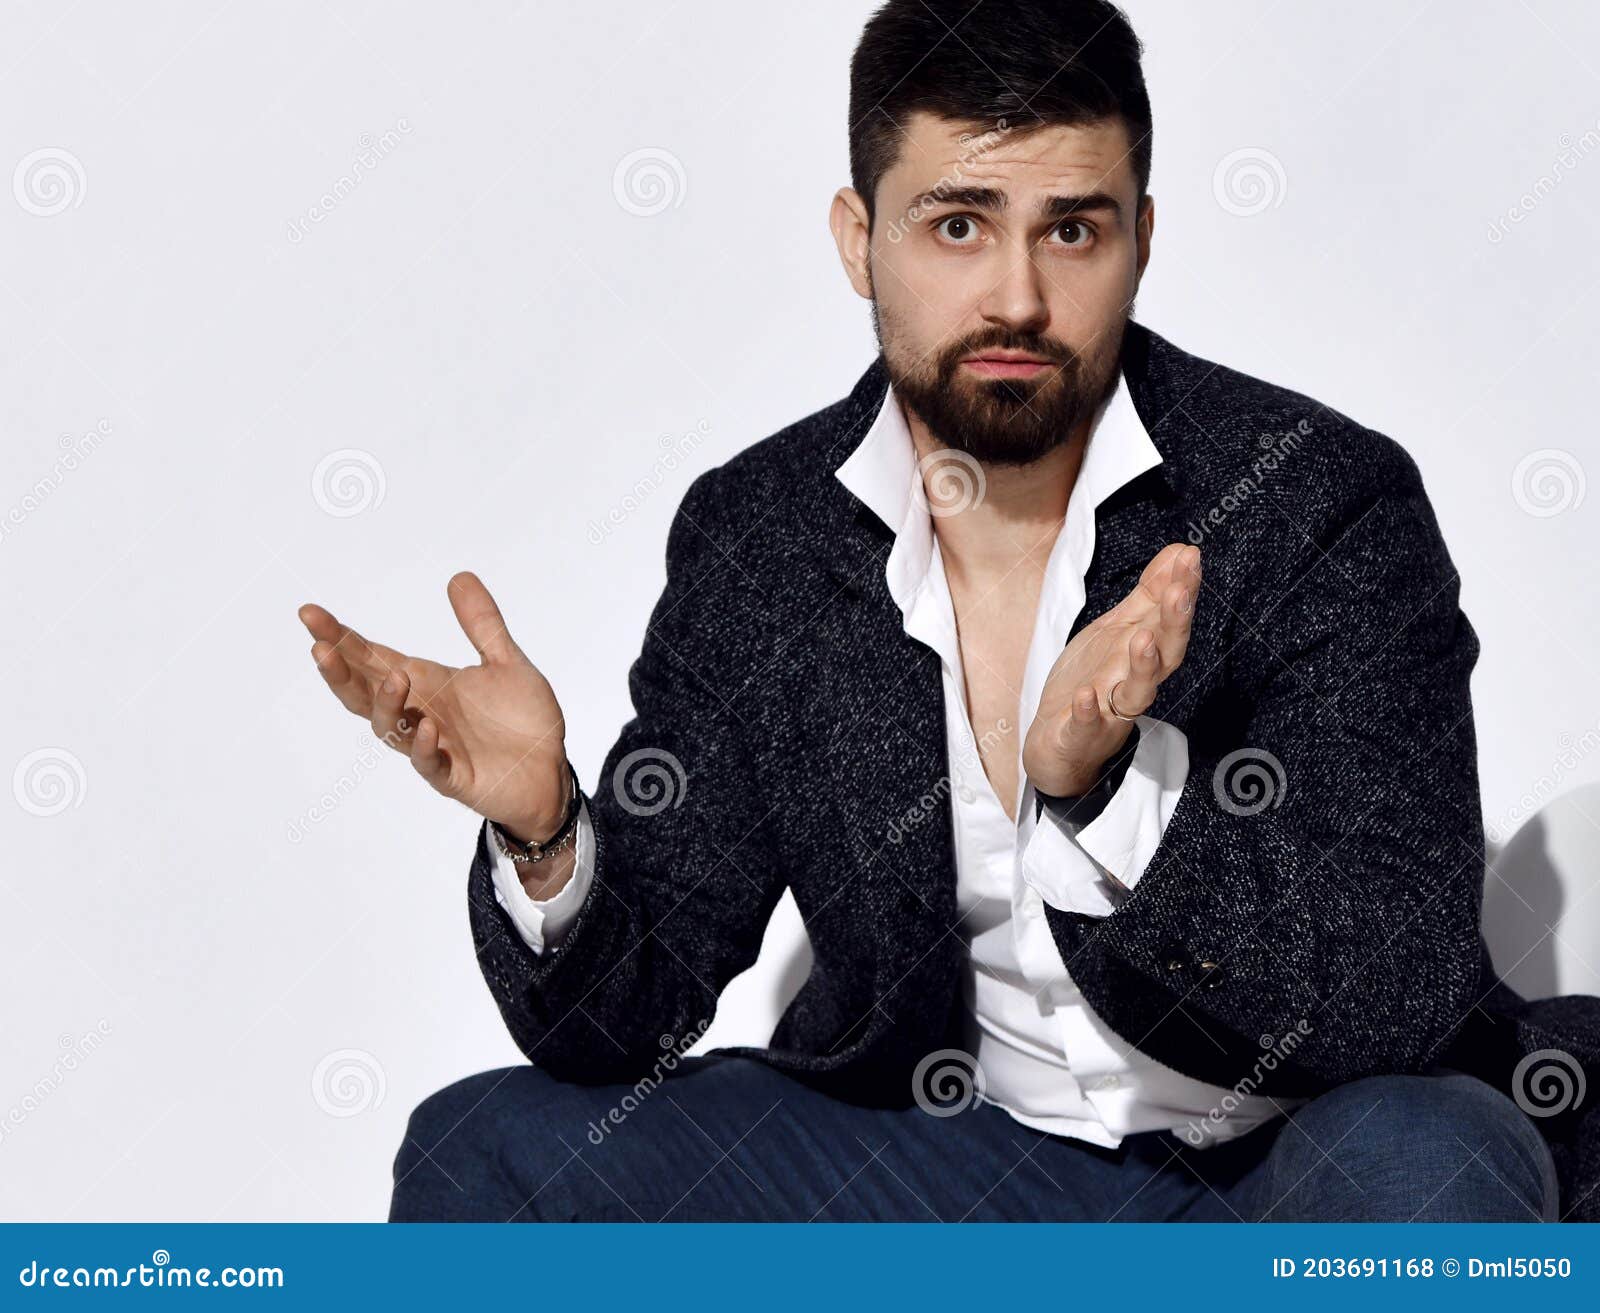 handsome serious brunette brutal businessman in stylish official suit and shirt sitting and gesticulating during communication